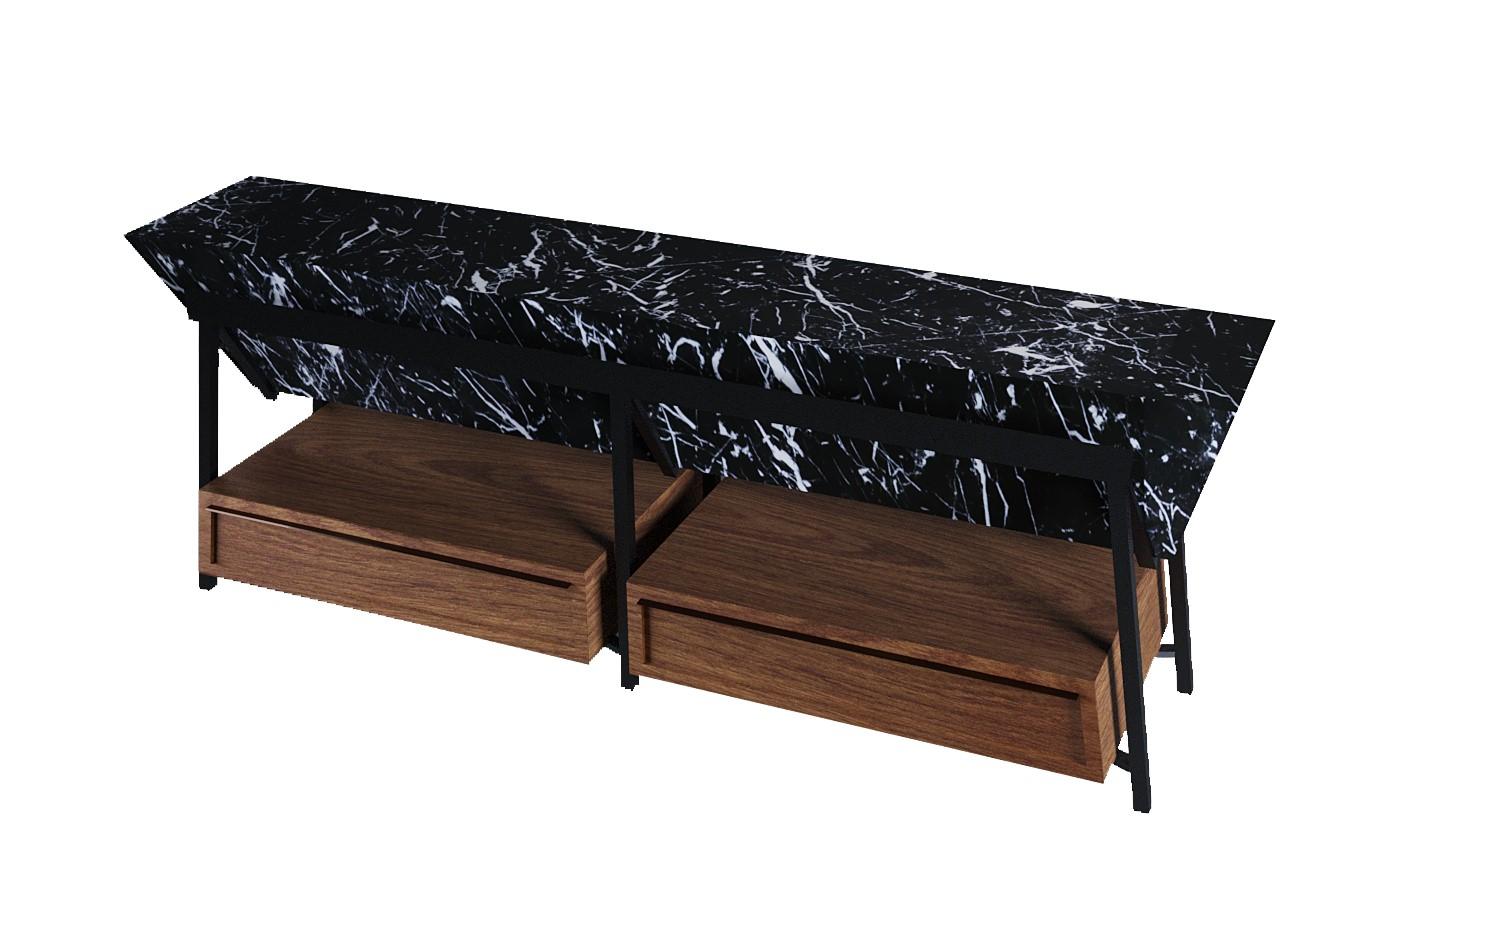 𝗣𝗿𝗼𝗱𝘂𝗰𝘁 𝗗𝗲𝘁𝗮𝗶𝗹𝘀:
TV console table designed in a triangular prism shape. The technology used to cut marble veneer in this console table allows it to be notably lighter as compared with a solid marble piece, while keeping a strong and